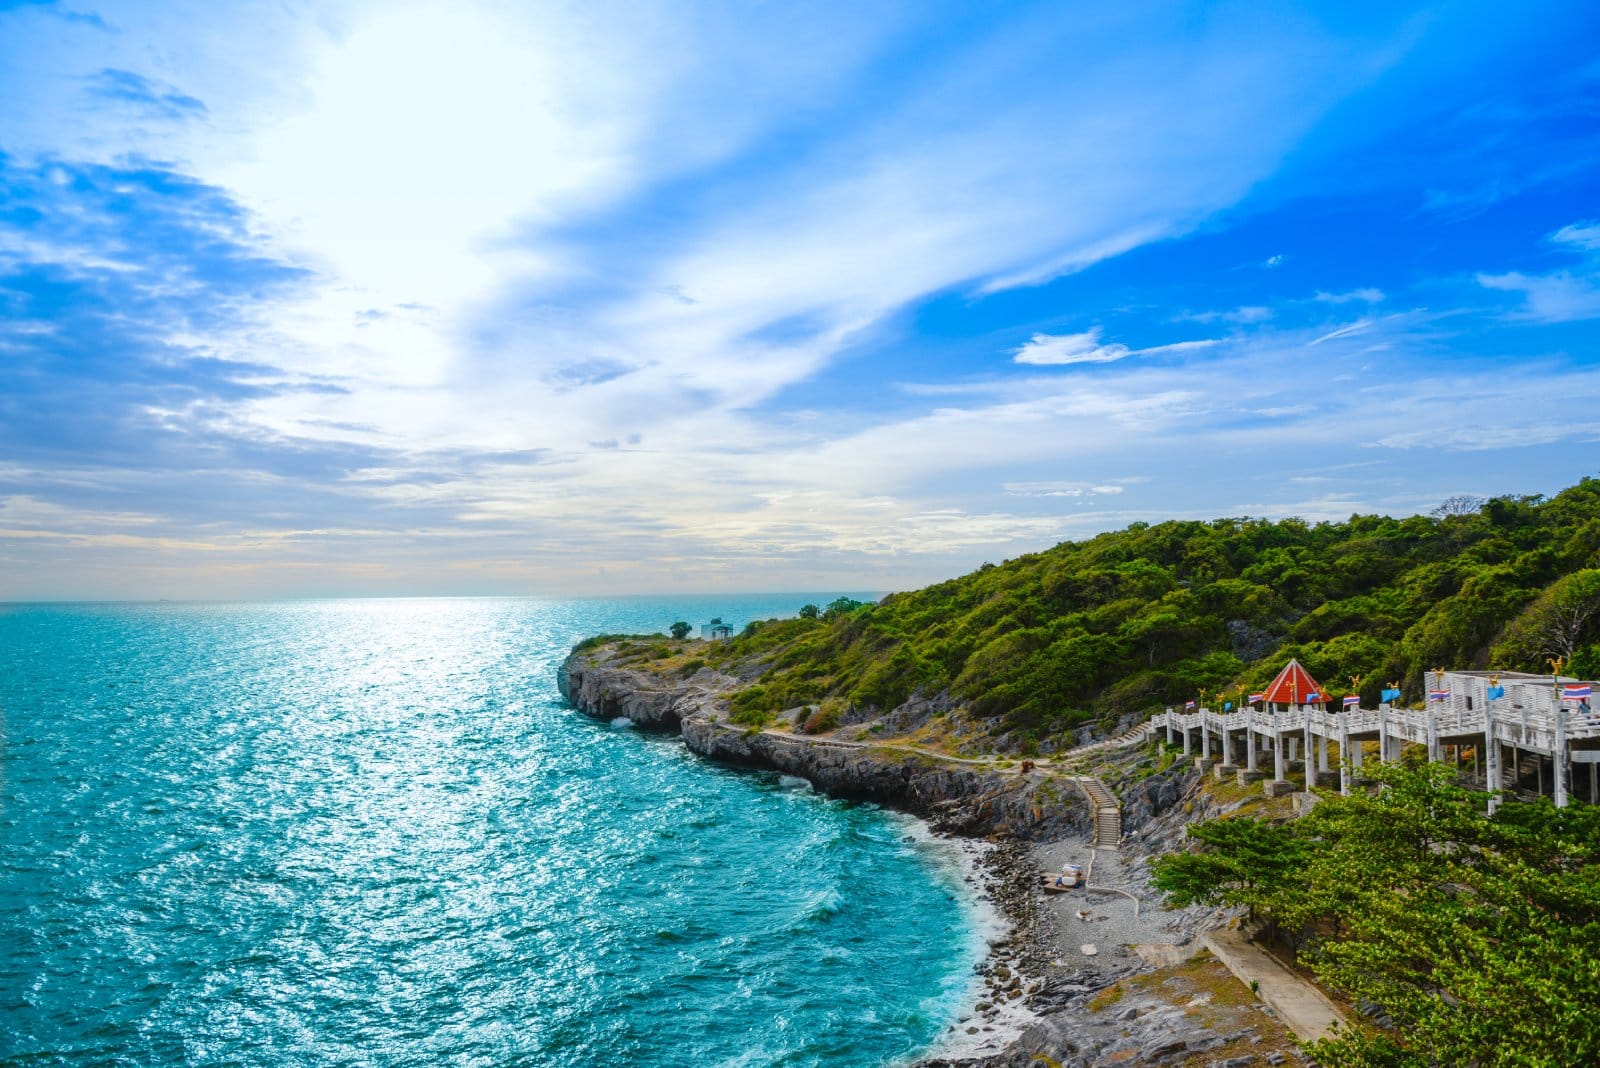 <p class="wp-caption-text">Image Credit: Shutterstock / spiphotoone</p>  <p><span>Koh Sichang, situated in the Gulf of Thailand, offers a unique blend of cultural heritage and serene landscapes. This island, once a royal retreat, is steeped in history, with ancient temples, a summer palace, and colonial buildings dotting its landscape. Despite its proximity to Bangkok, Koh Sichang maintains a peaceful atmosphere, with quiet beaches and lush hillsides offering a tranquil escape. The island’s slow pace of life and cultural richness make it an ideal destination for those seeking to immerse themselves in Thailand’s history while enjoying its natural beauty. Sustainable tourism practices on Koh Sichang ensure its historical sites and natural environments are preserved, offering a thoughtful and respectful way to experience one of Thailand’s lesser-known islands.</span></p>